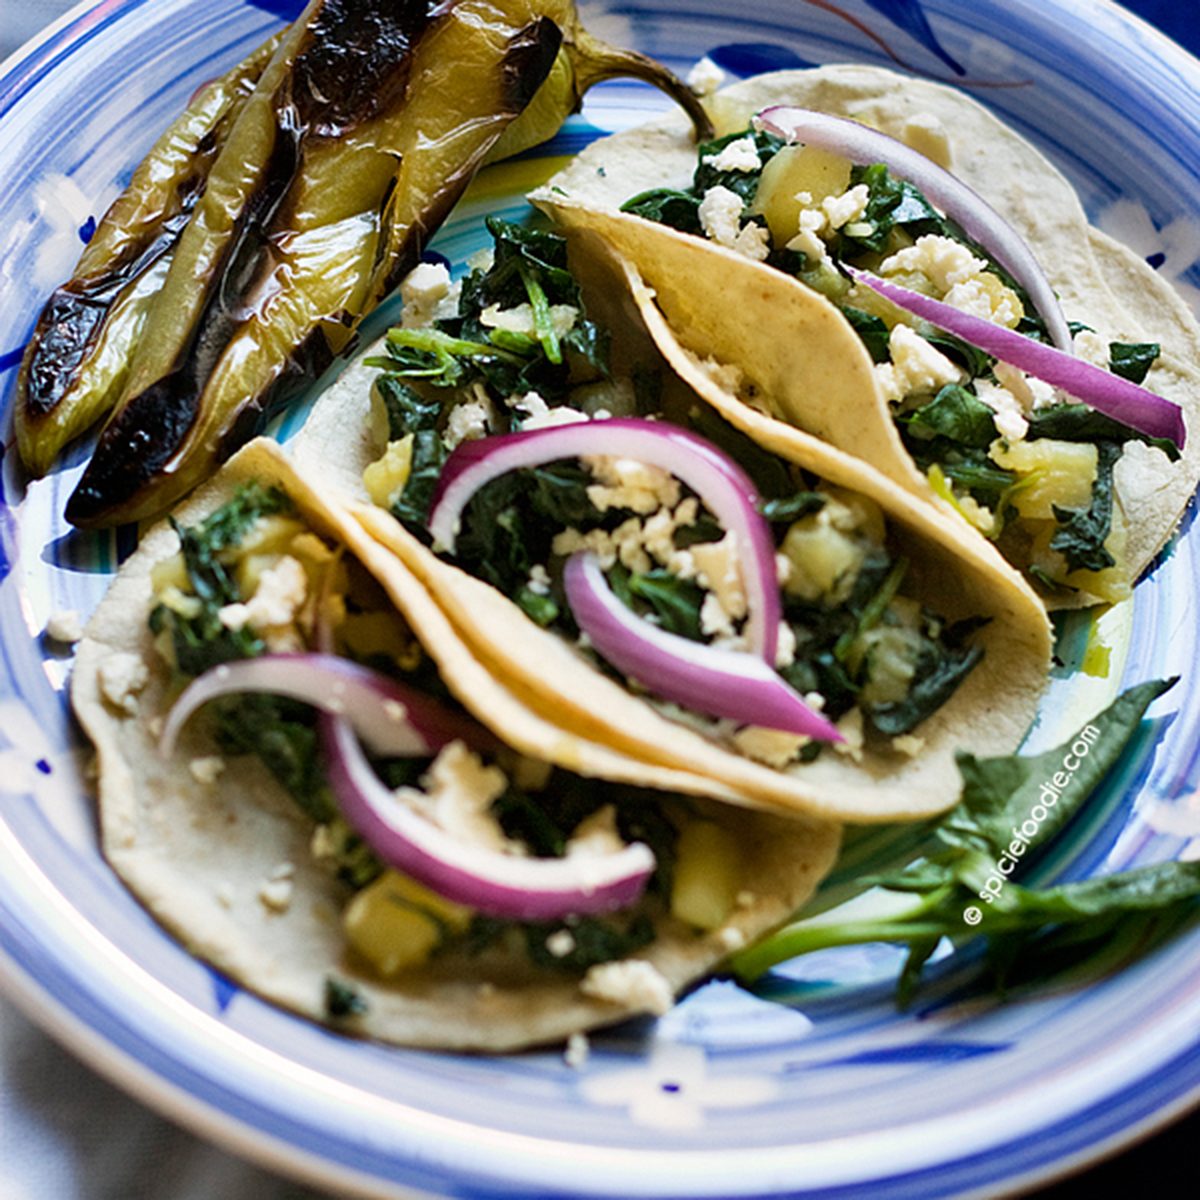 12 Authentic Taco Recipes We Can't Wait to Make